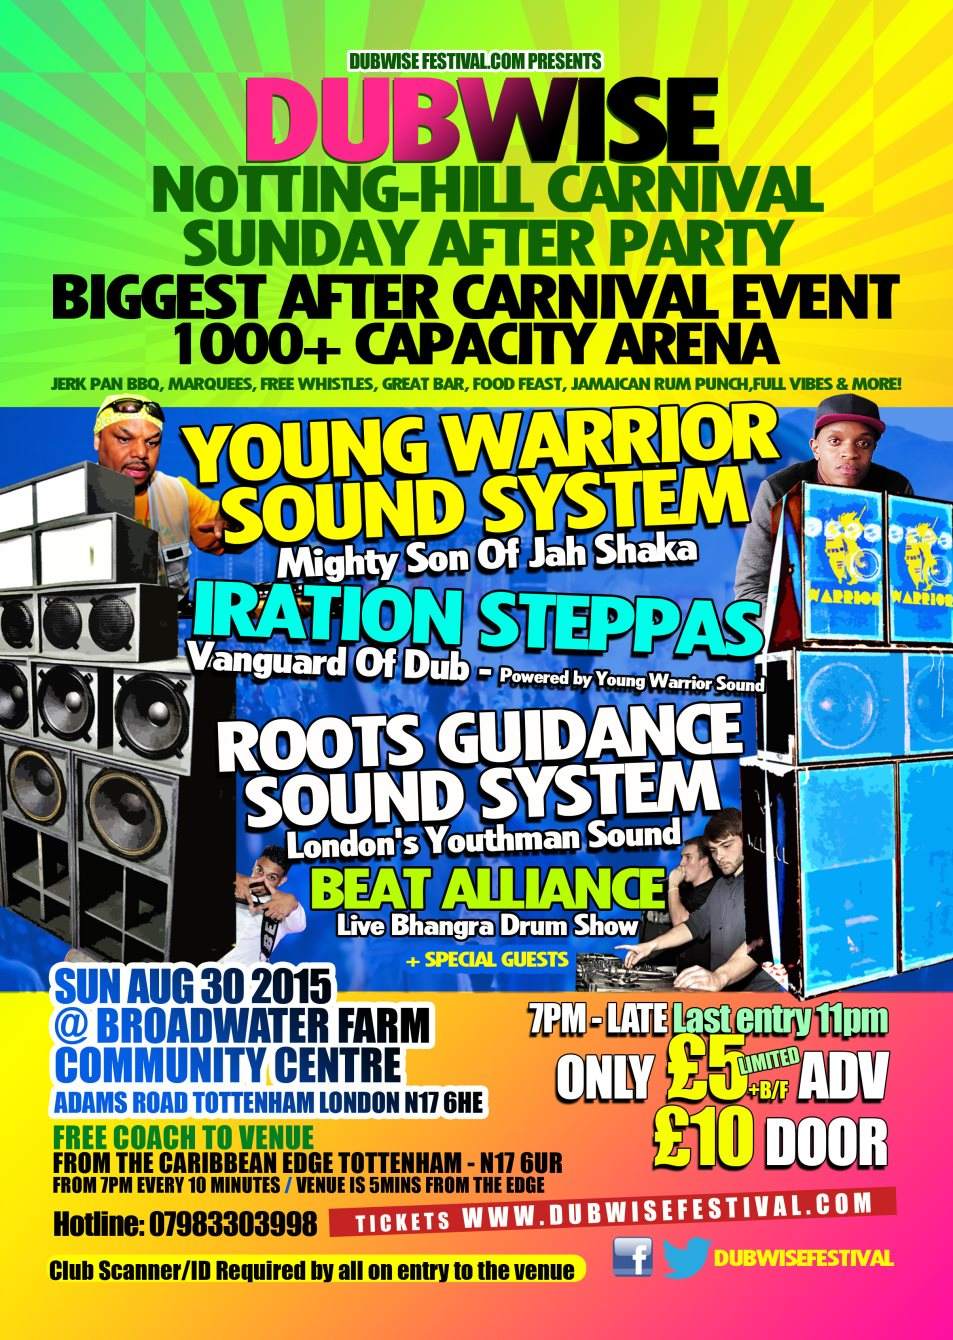 The Dubwise After Carnival Sunday JAM - Flyer front